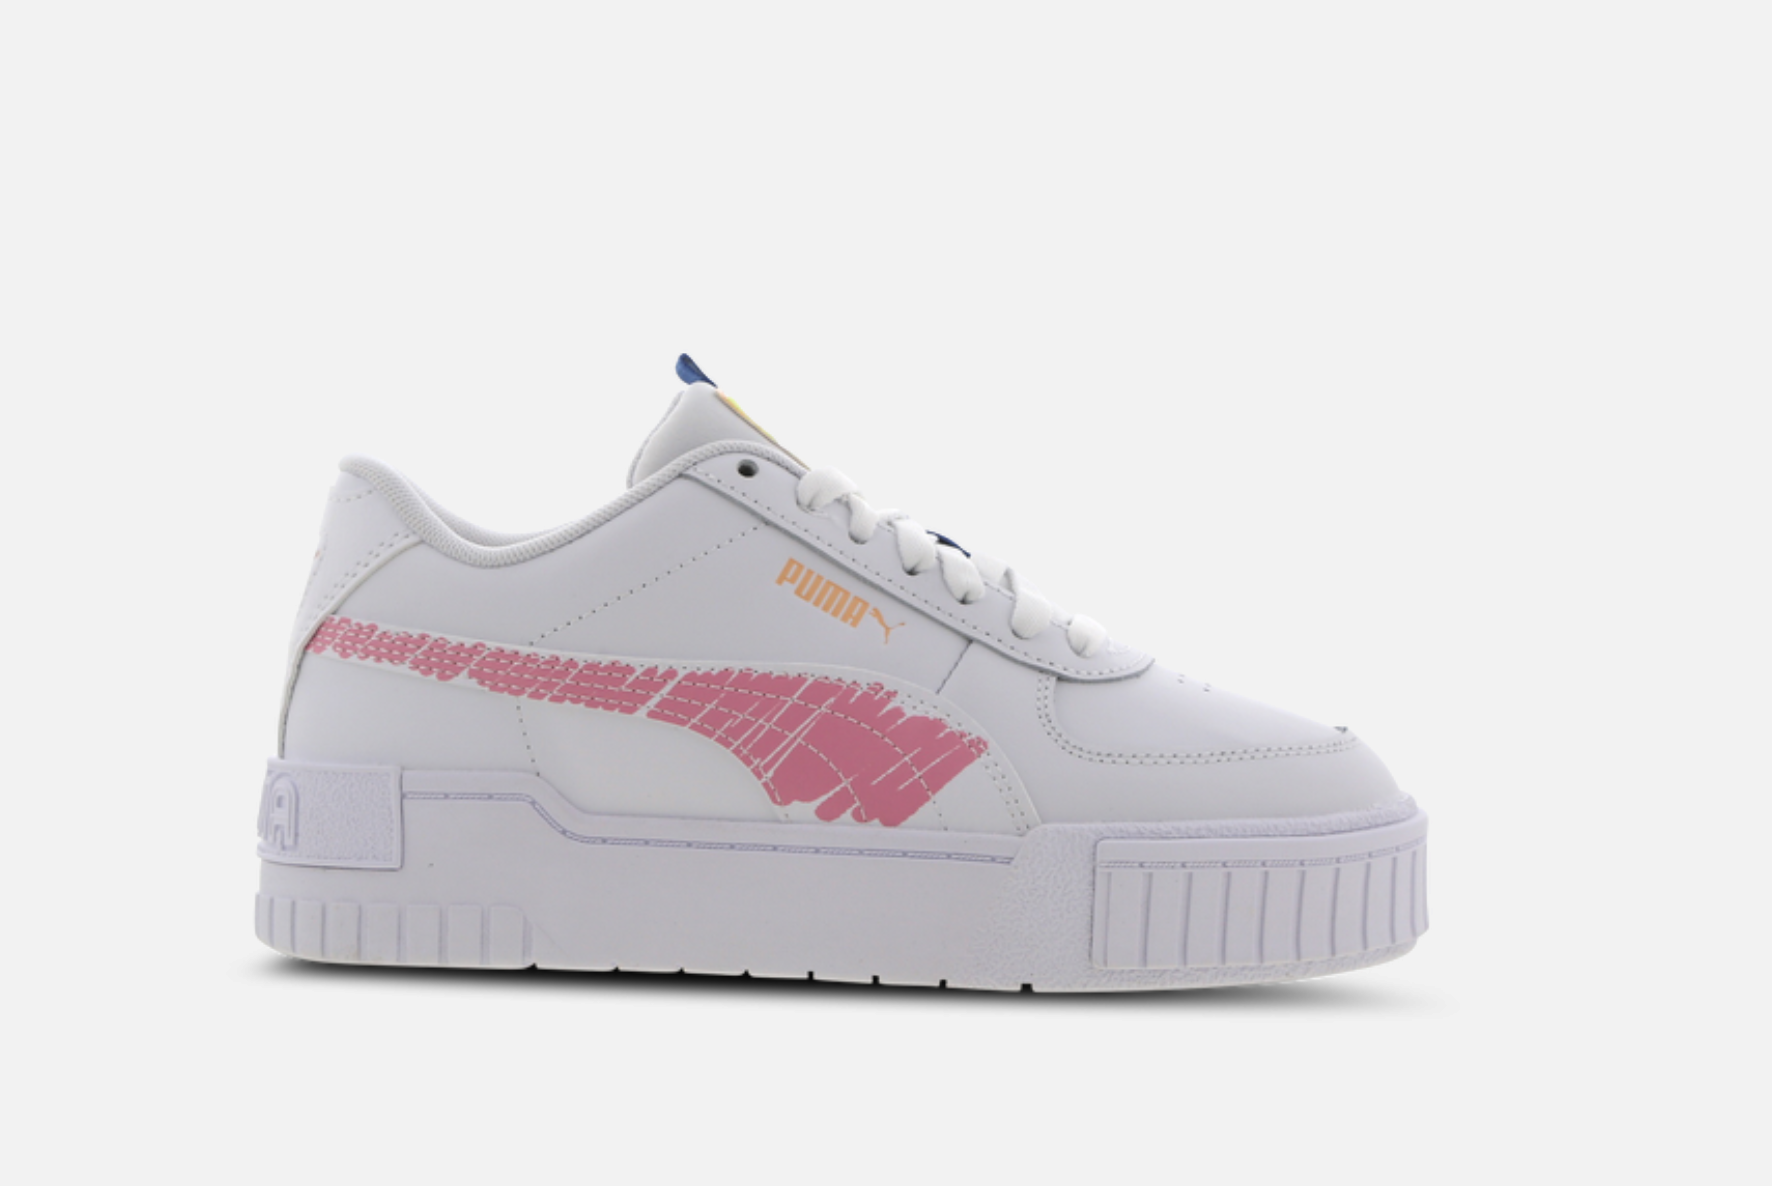 FOOTLOCKER-SNEAKERS-COLLECTION-ART-FASHION-SHOES-STREET-STYLE-SS21-2.png